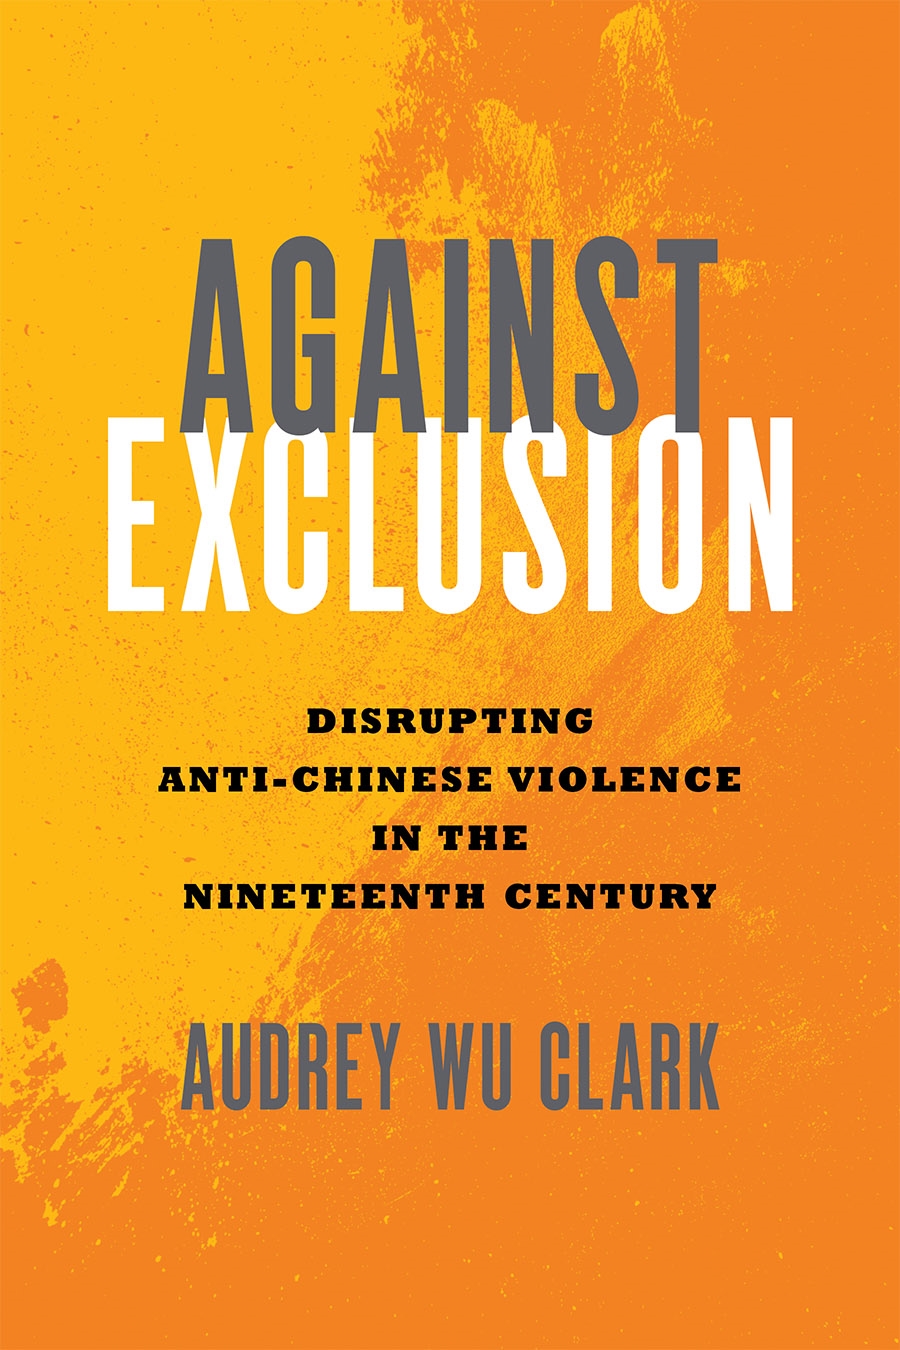 Against Exclusion: Disrupting Anti-Chinese Violence in the Nineteenth Century cover